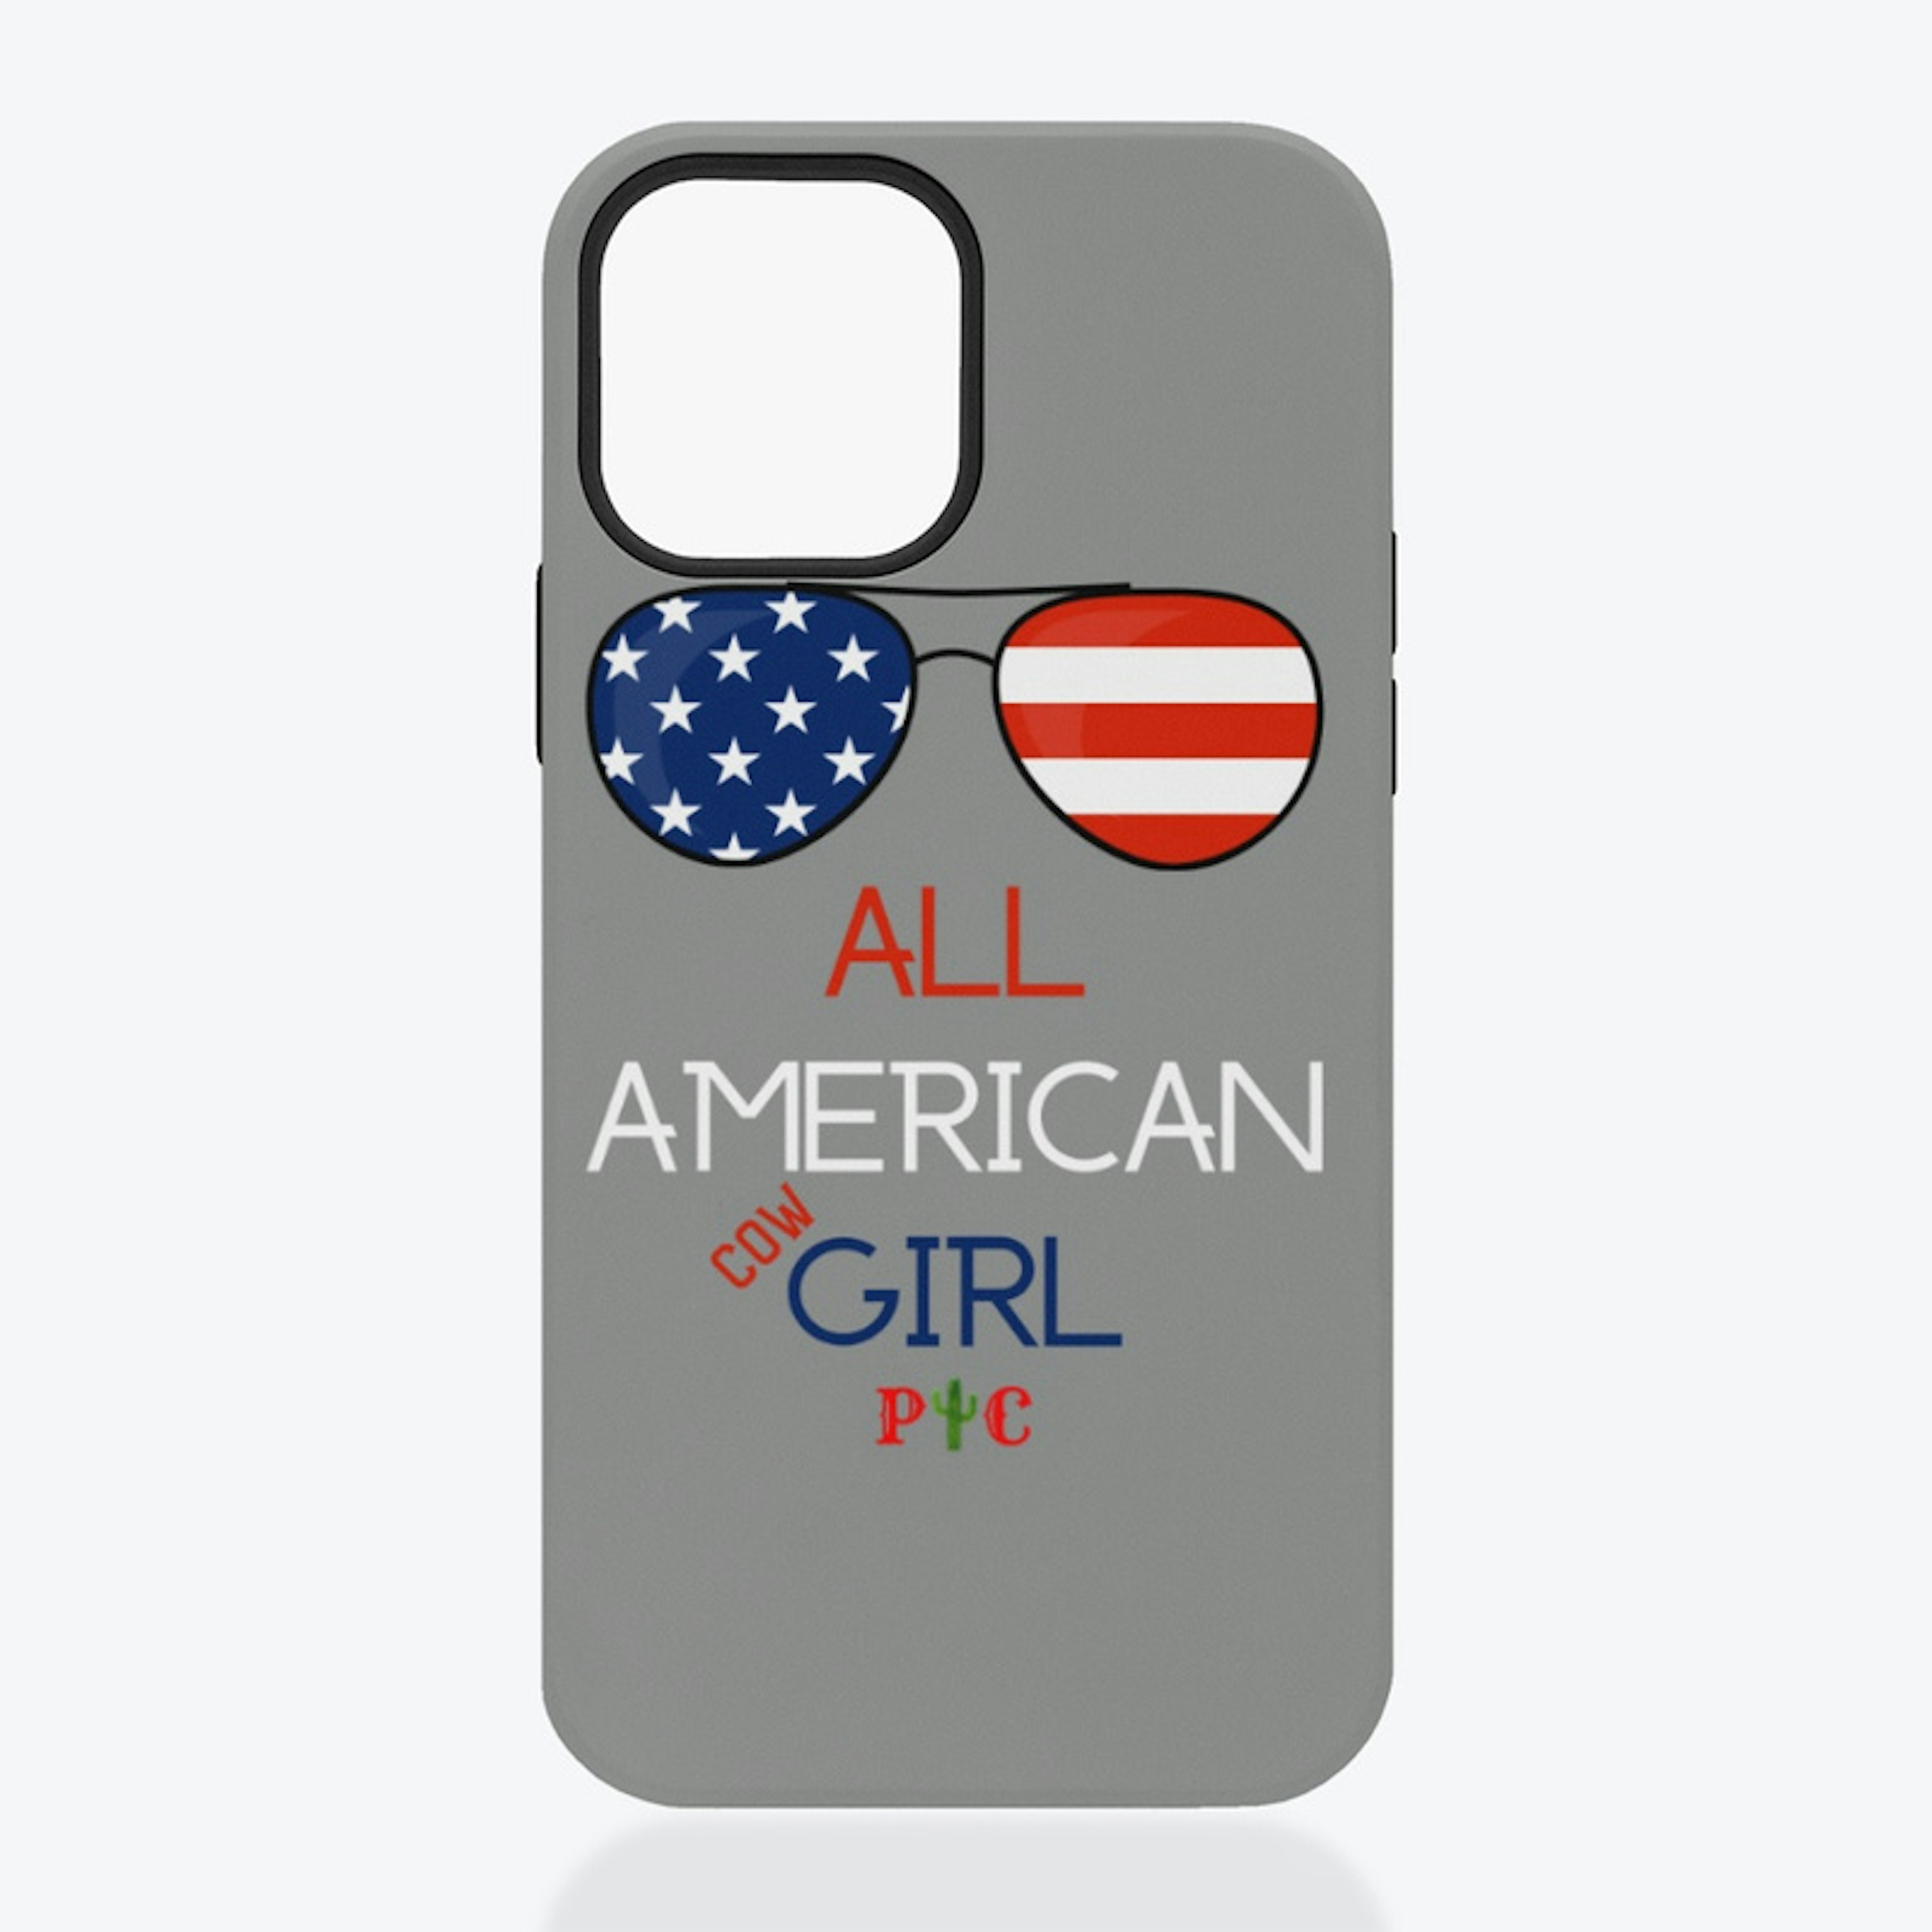 American Cowgirl iPhone Case